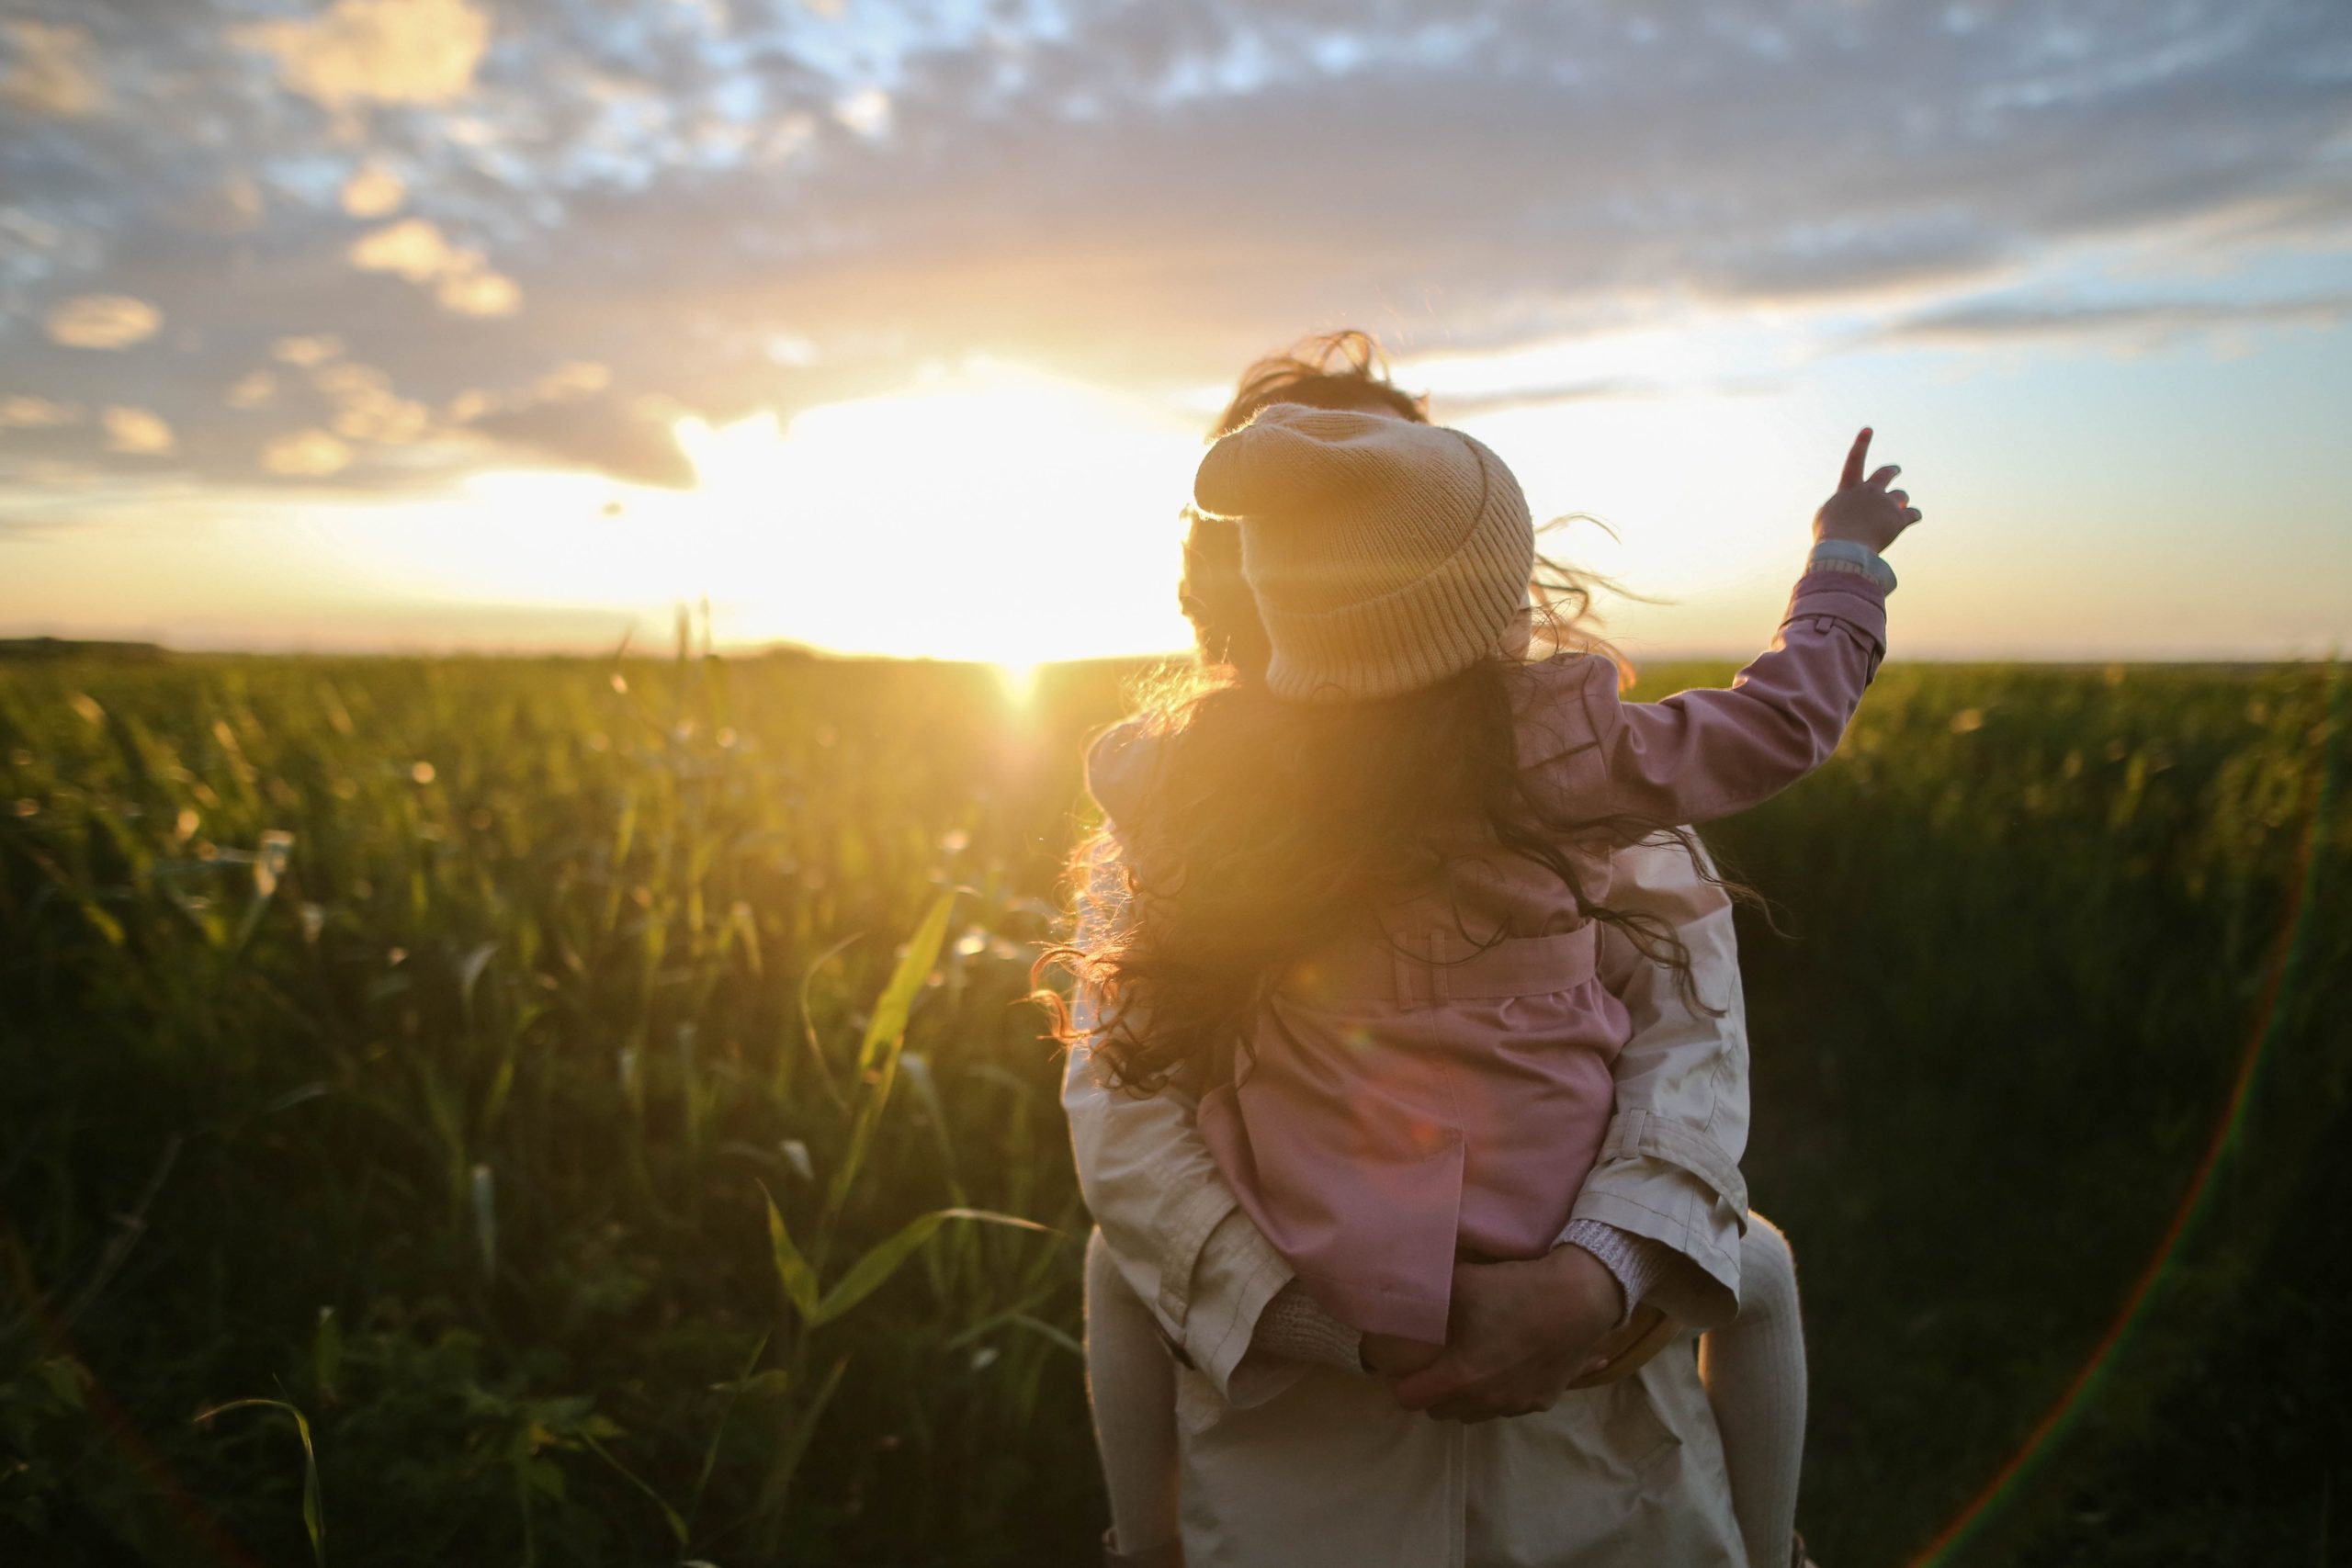 A mother holding her young daughter as they stand in a field, the sun rising behind them.